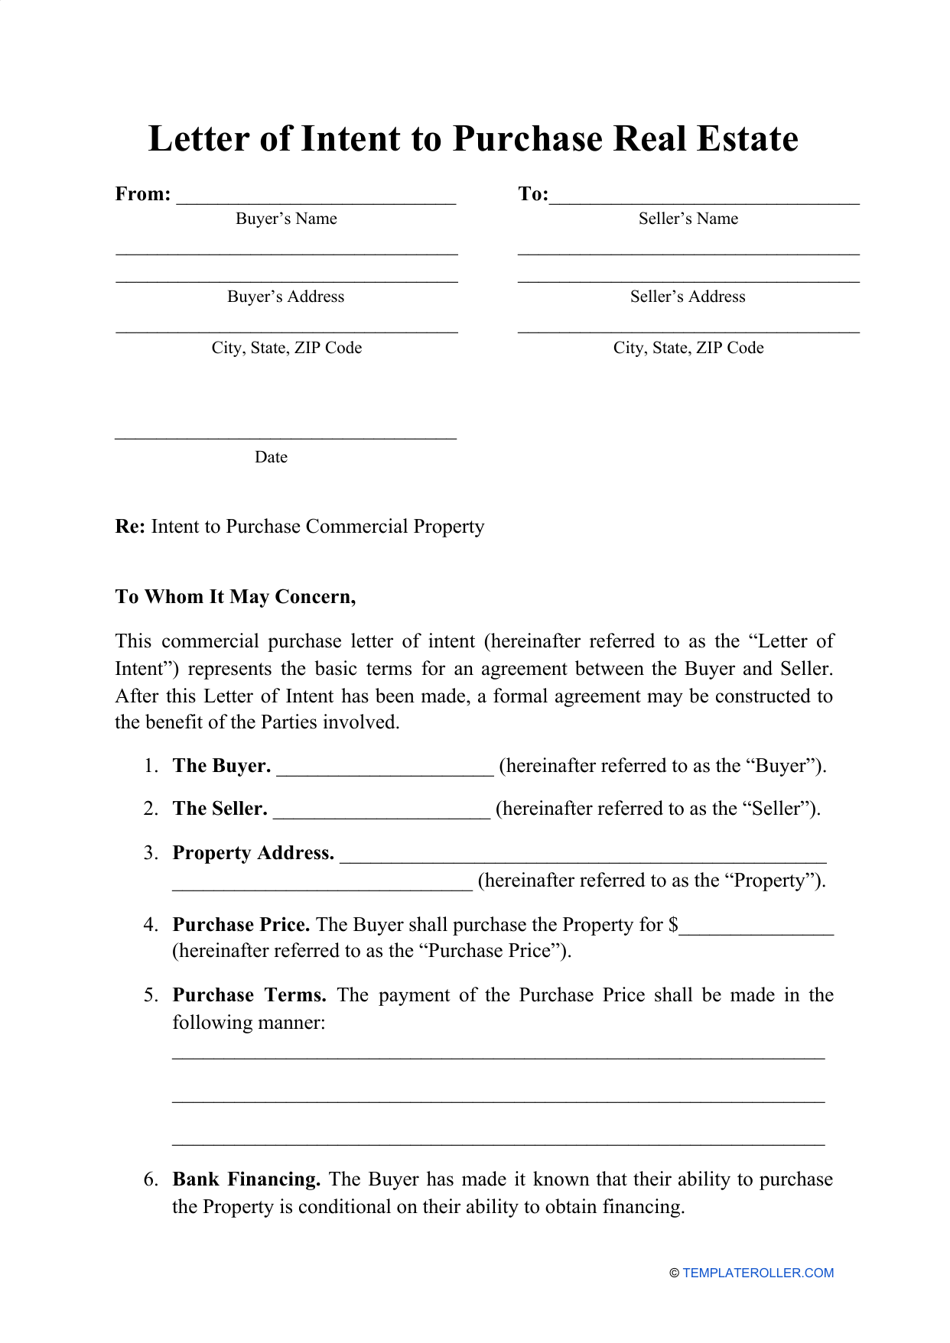 Illustration of a professional-looking Letter of Intent to Purchase Real Estate Template